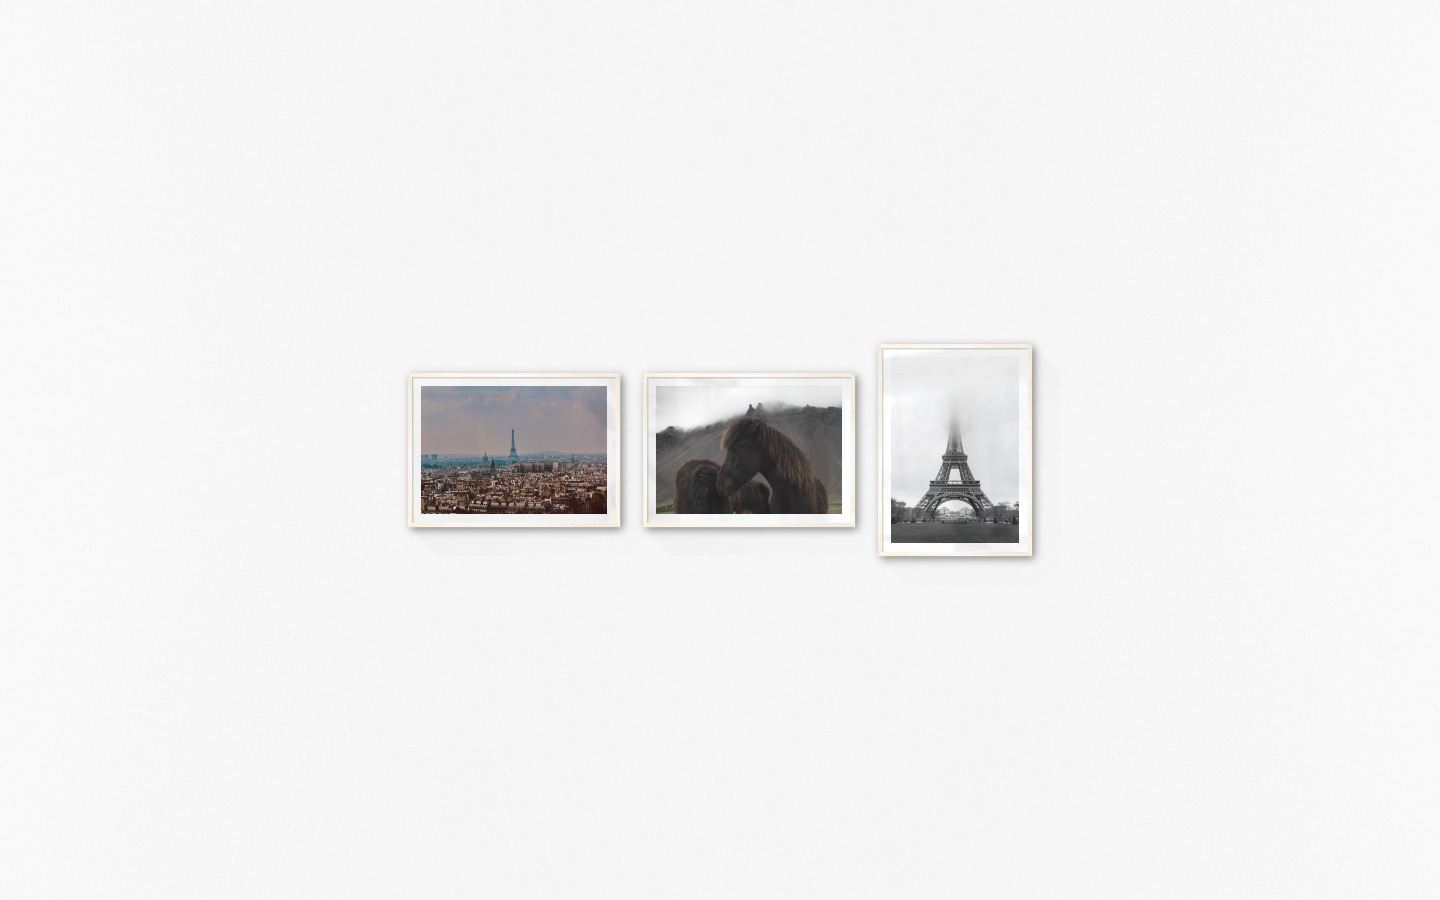 Gallery wall with picture frames in light wood in sizes 50x70 with prints "Eifel Tower in Paris", "Icelandic horses" and "Eifel tower with fog"